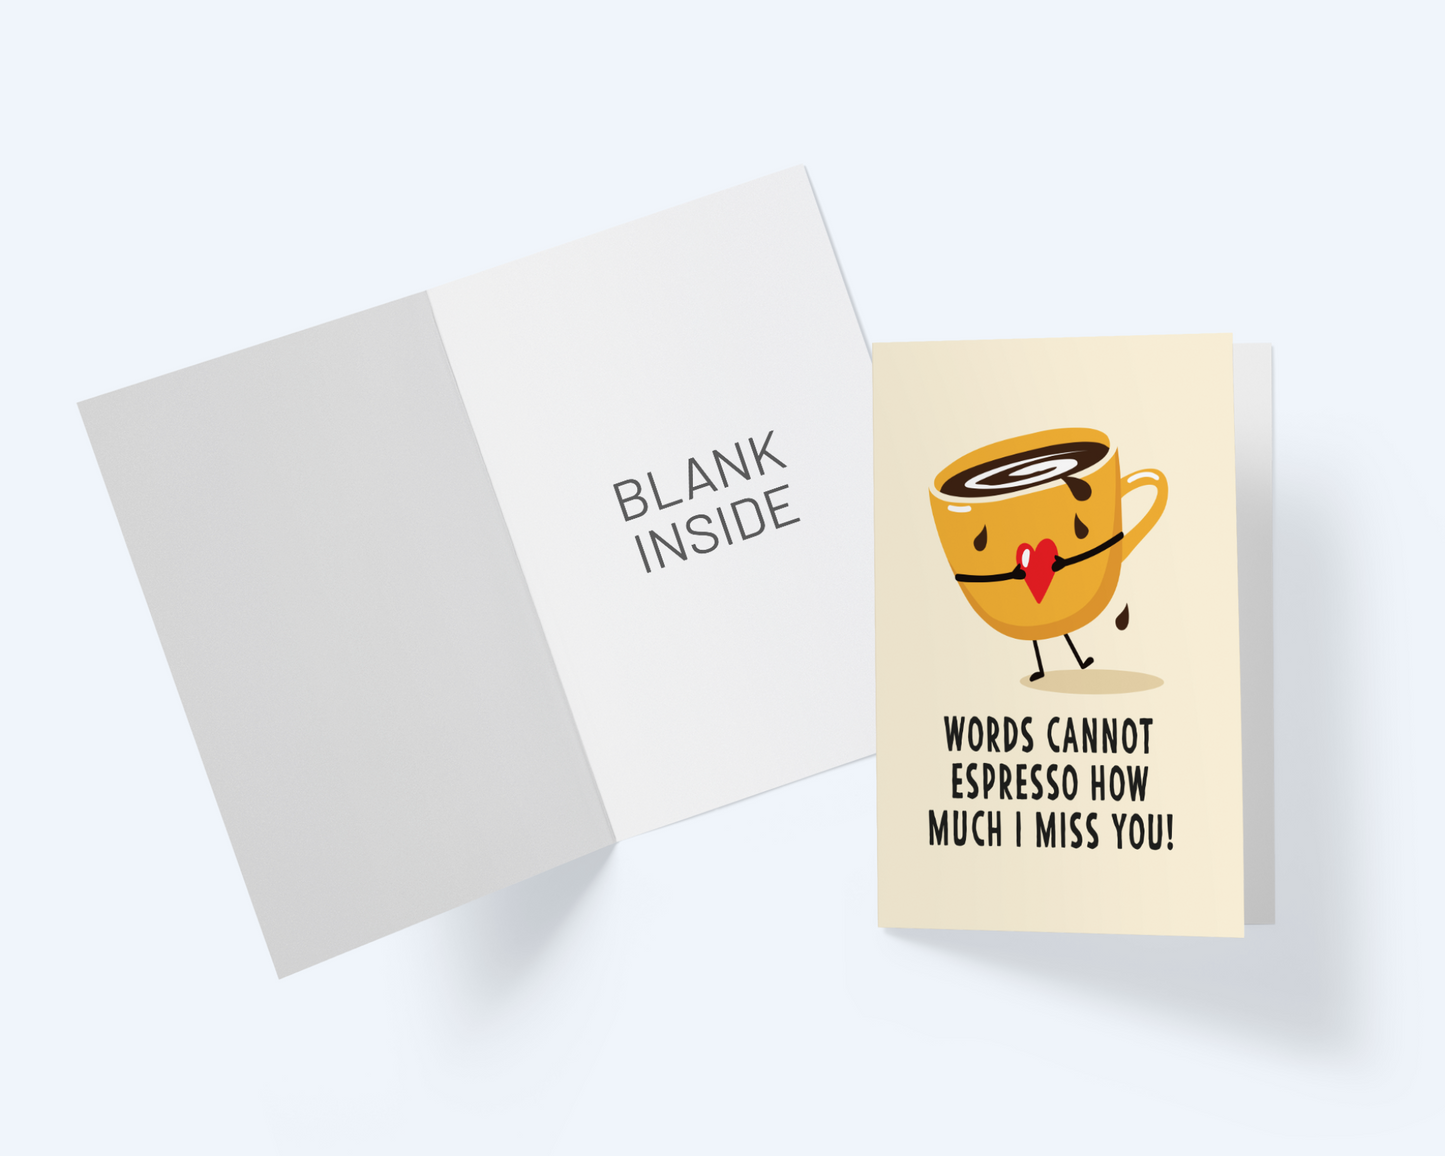 Words Cannot Espresso How Much I Miss You: Thinking Of You Greeting Card.